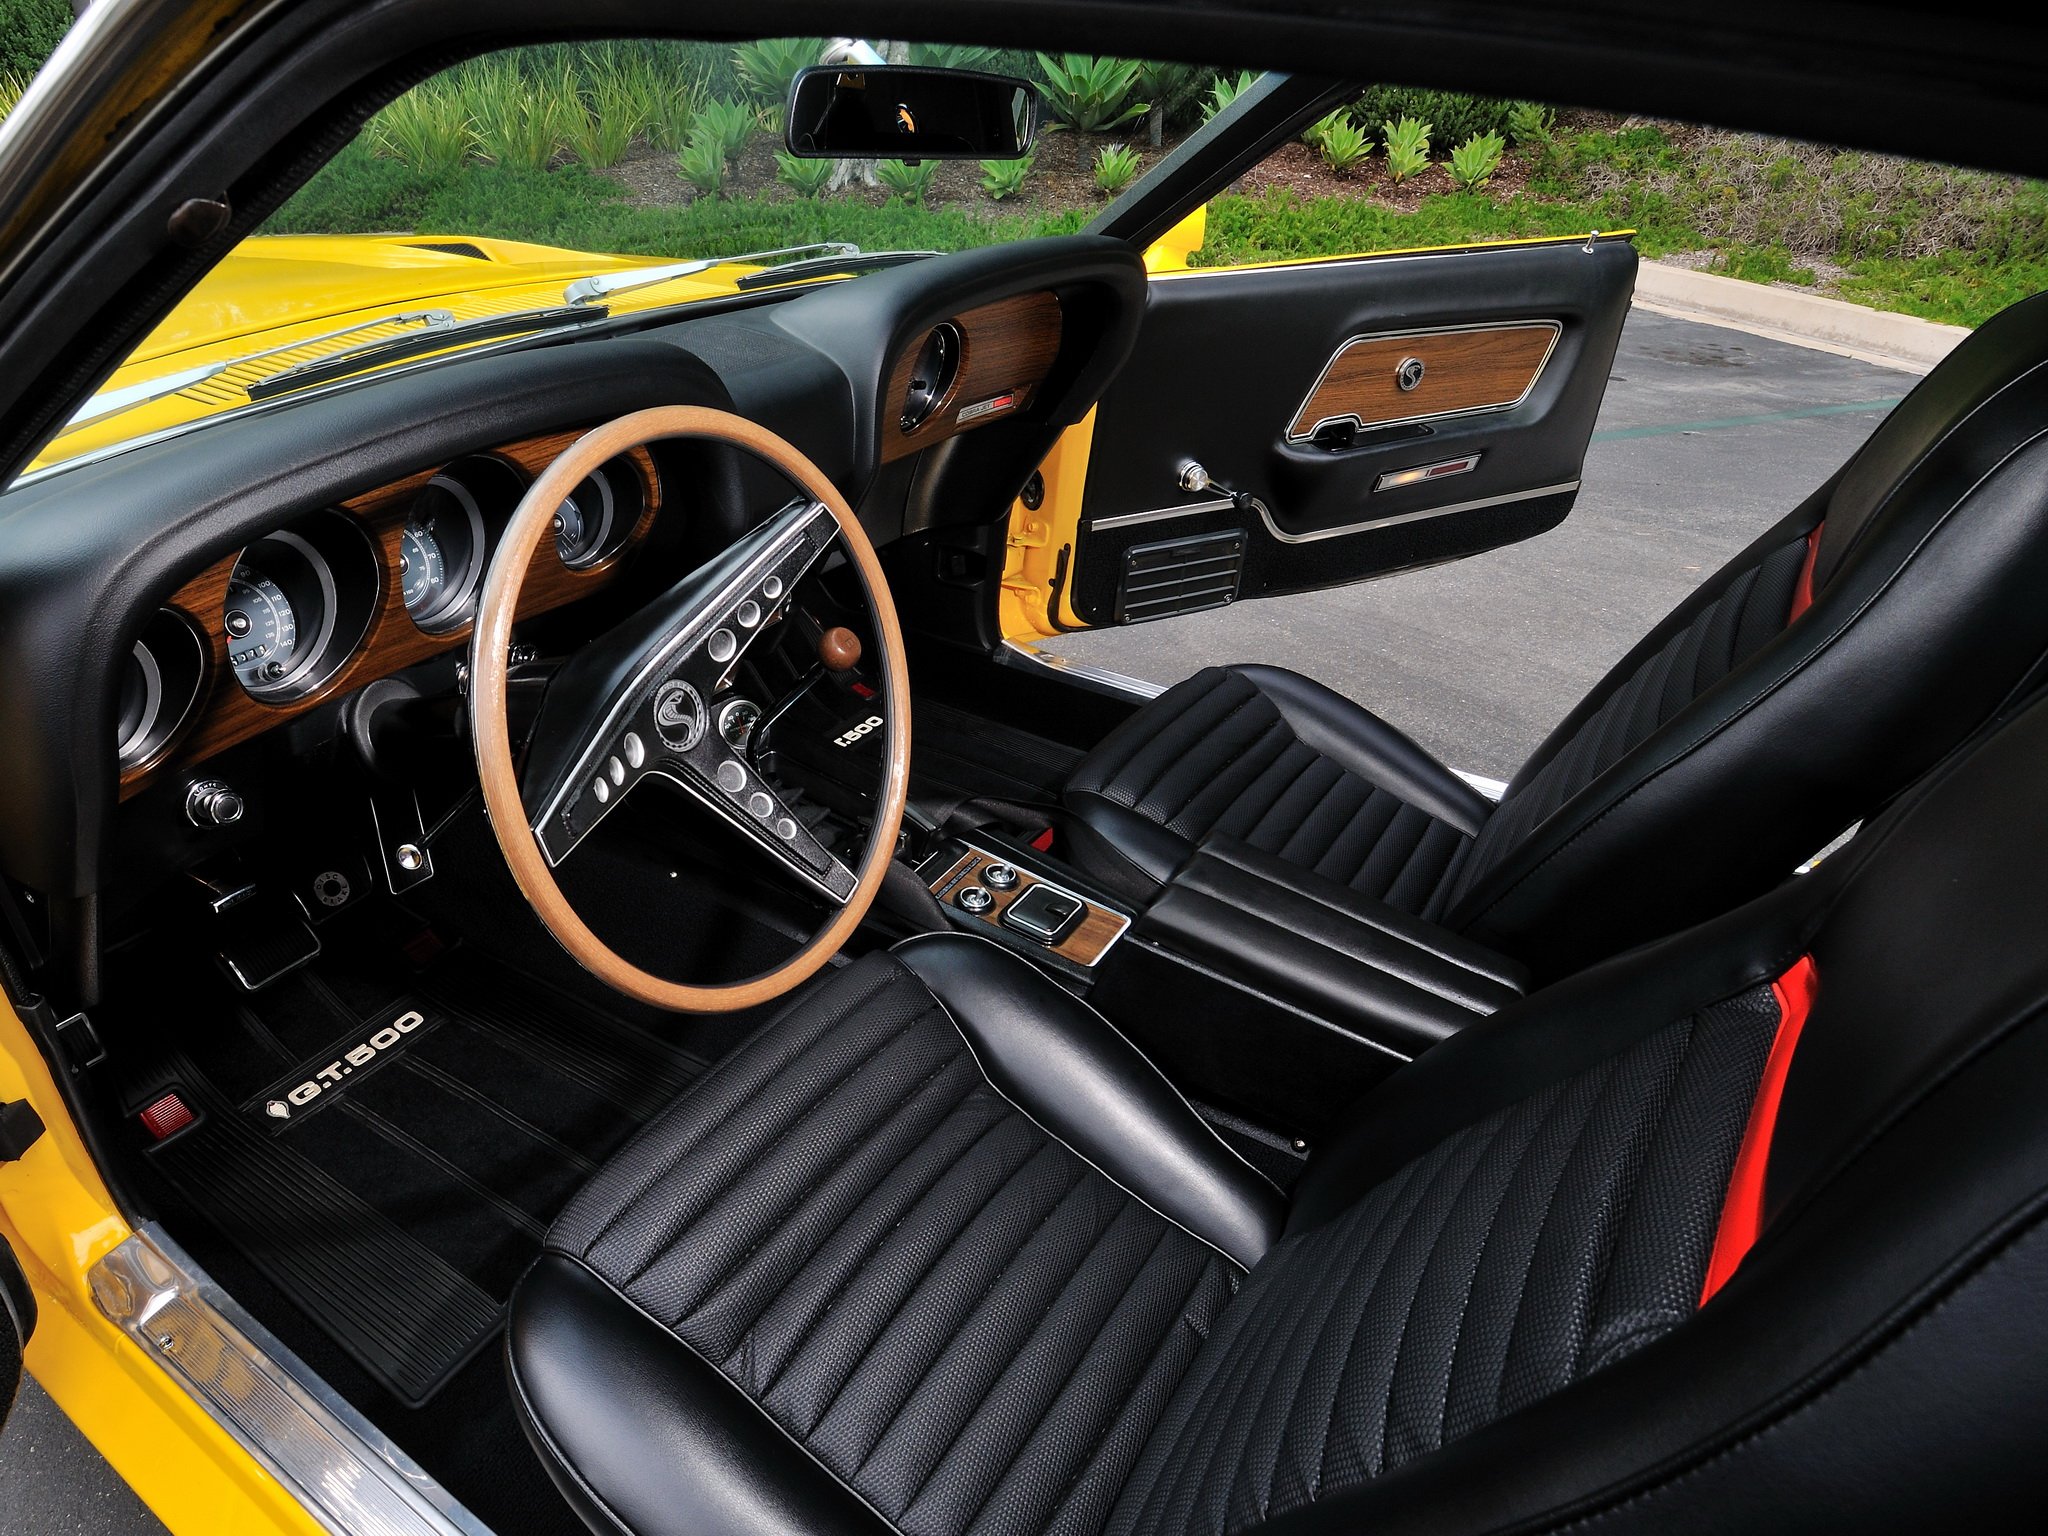 1969, Shelby, Gt500, Ford, Mustang, Muscle, Classic, Interior Wallpaper